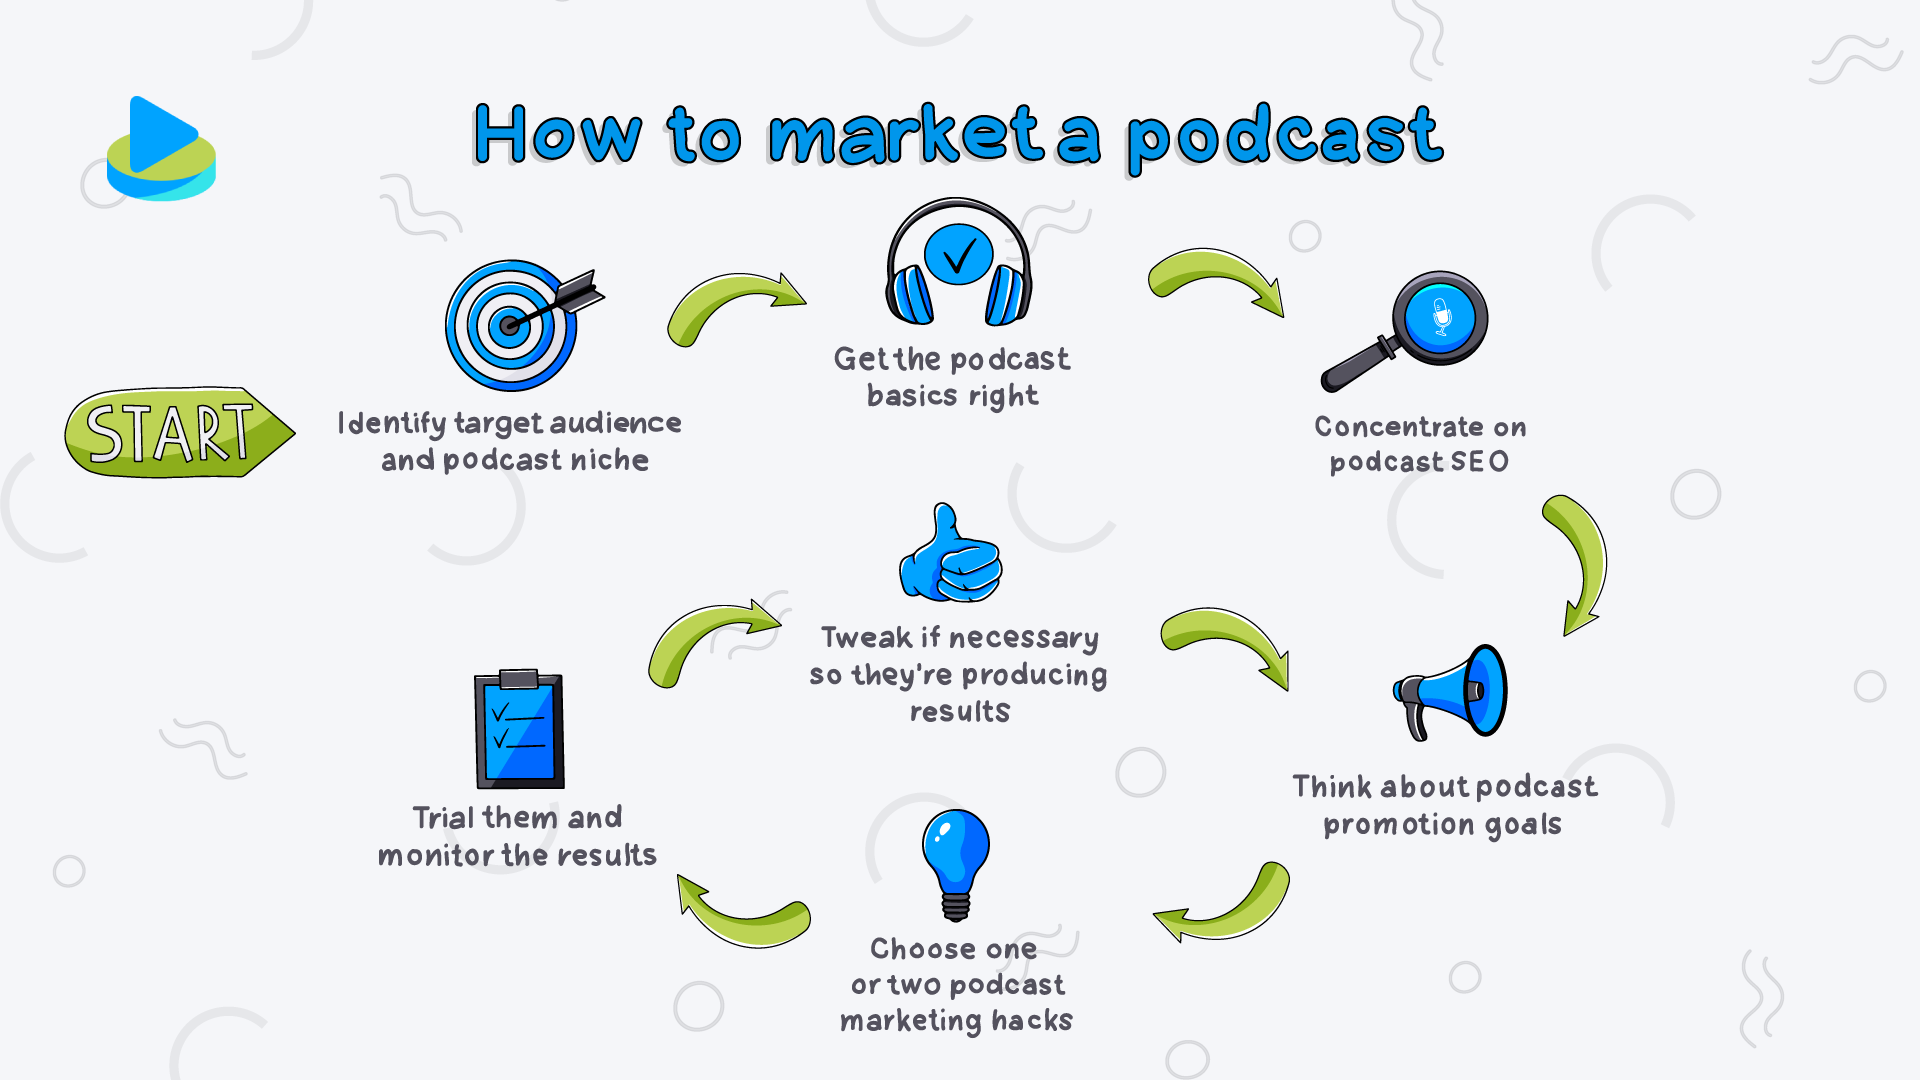 How to market a podcast step-by-step guide